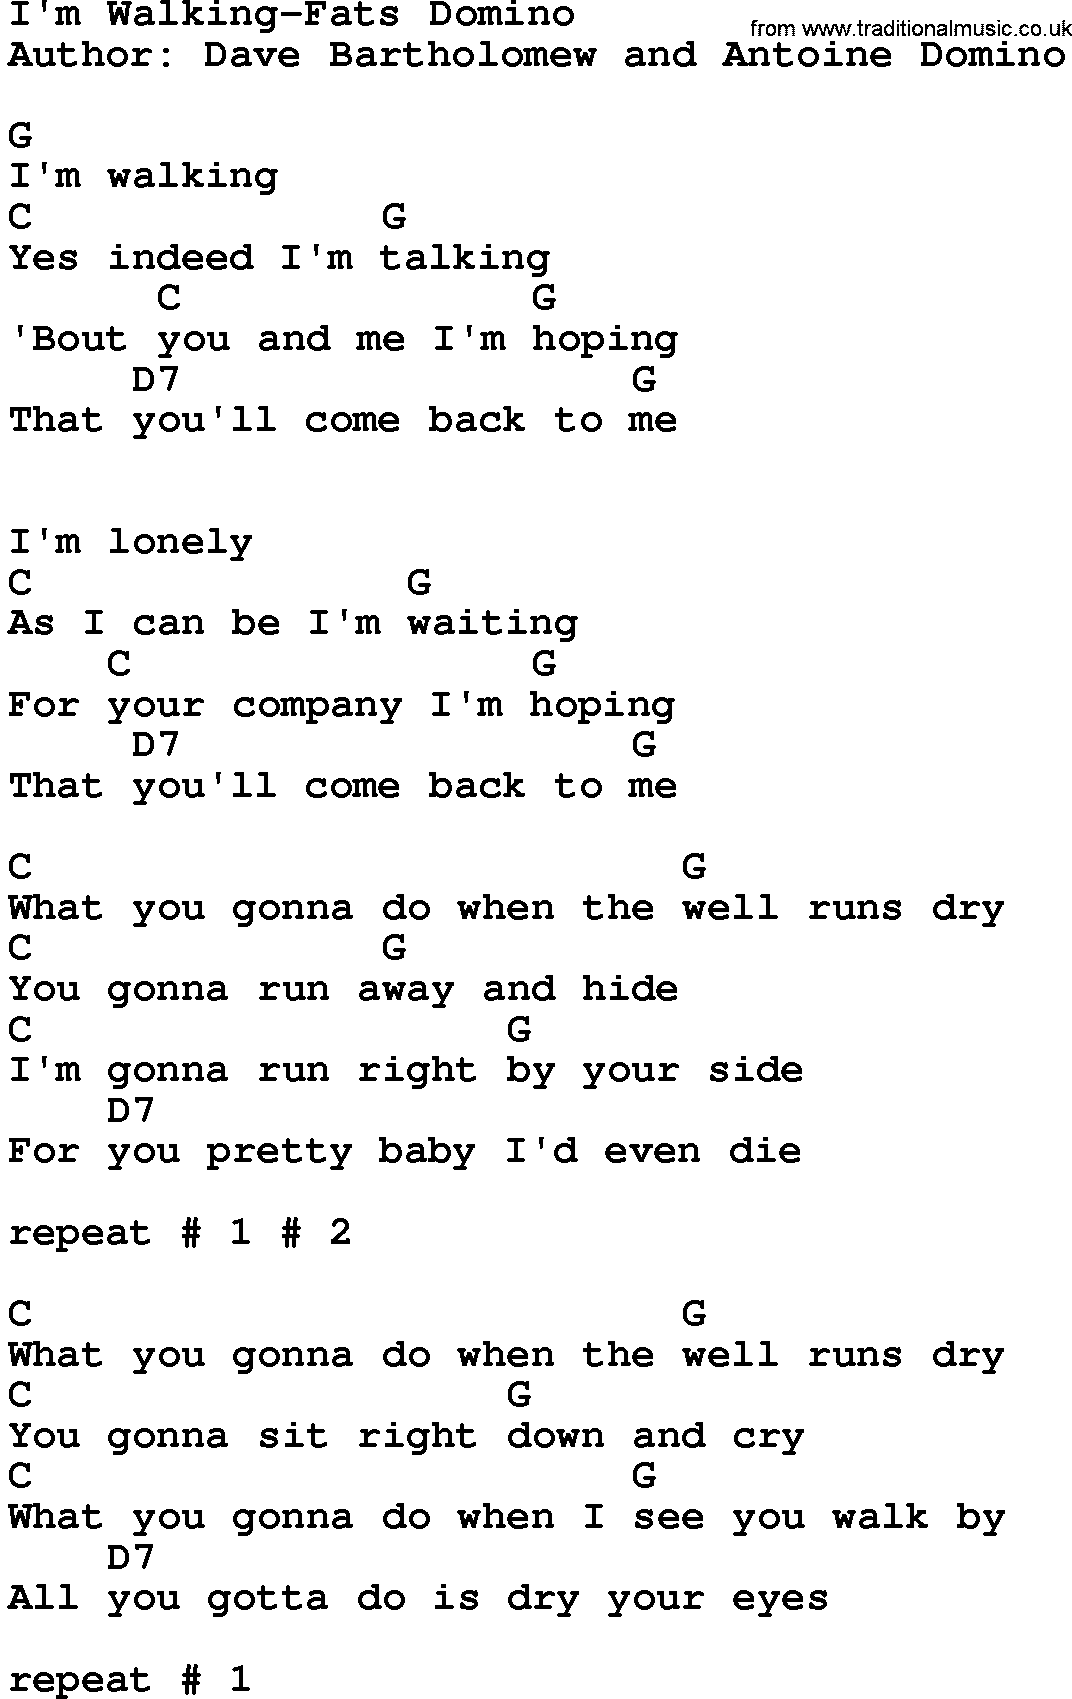 Country Music:I'm Walking-Fats Domino Lyrics and Chords1072 x 1699